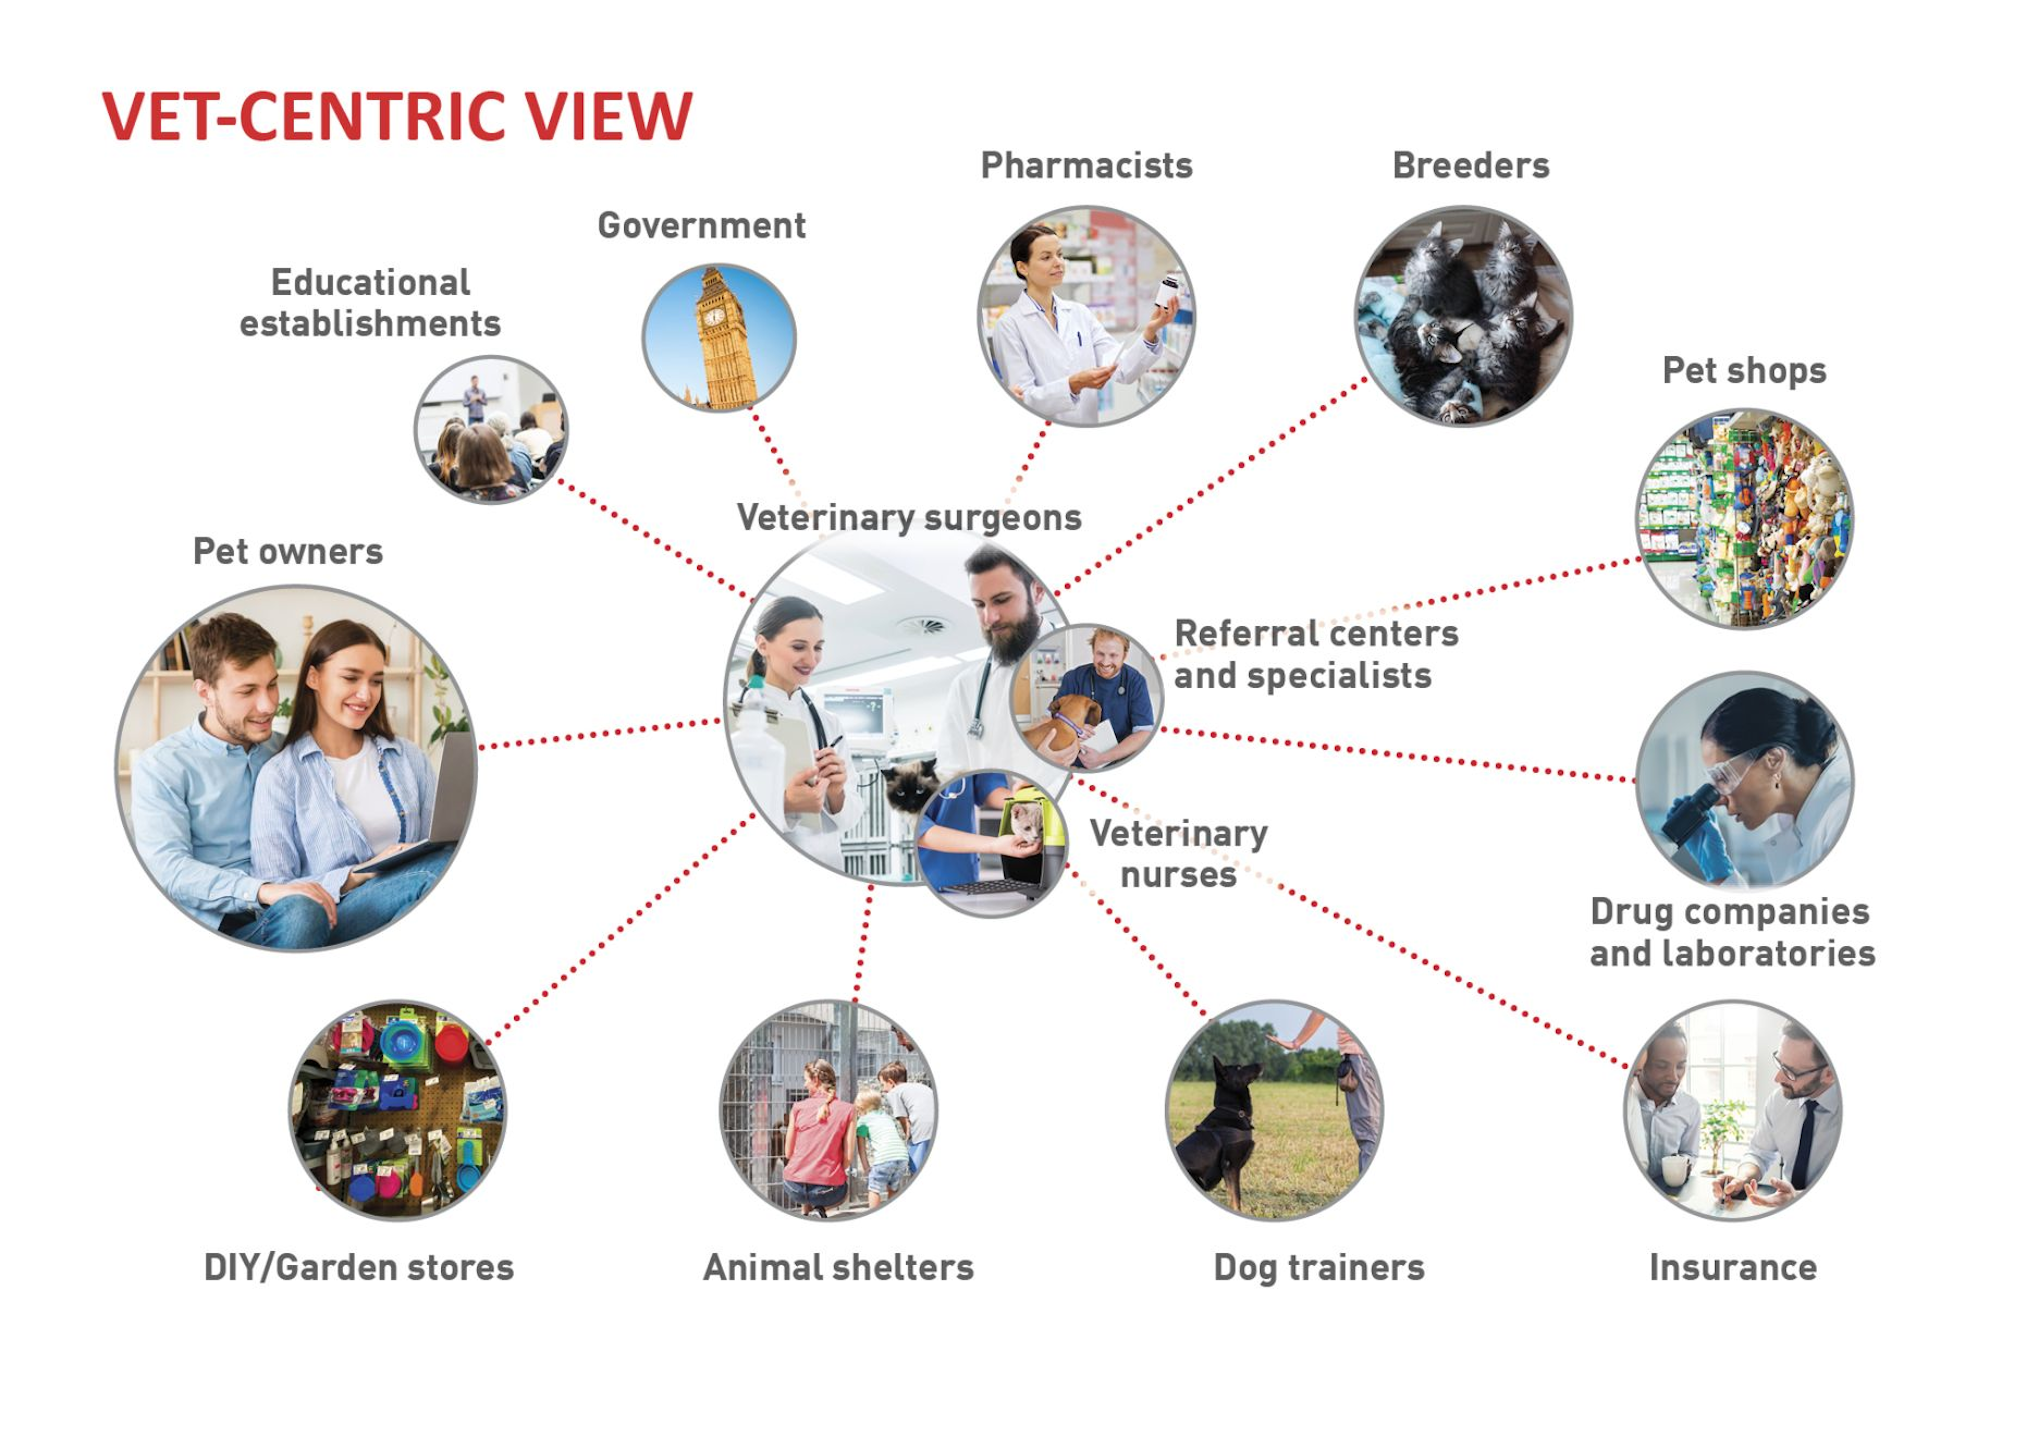 The various stakeholders as seen from the veterinary-centered viewpoint